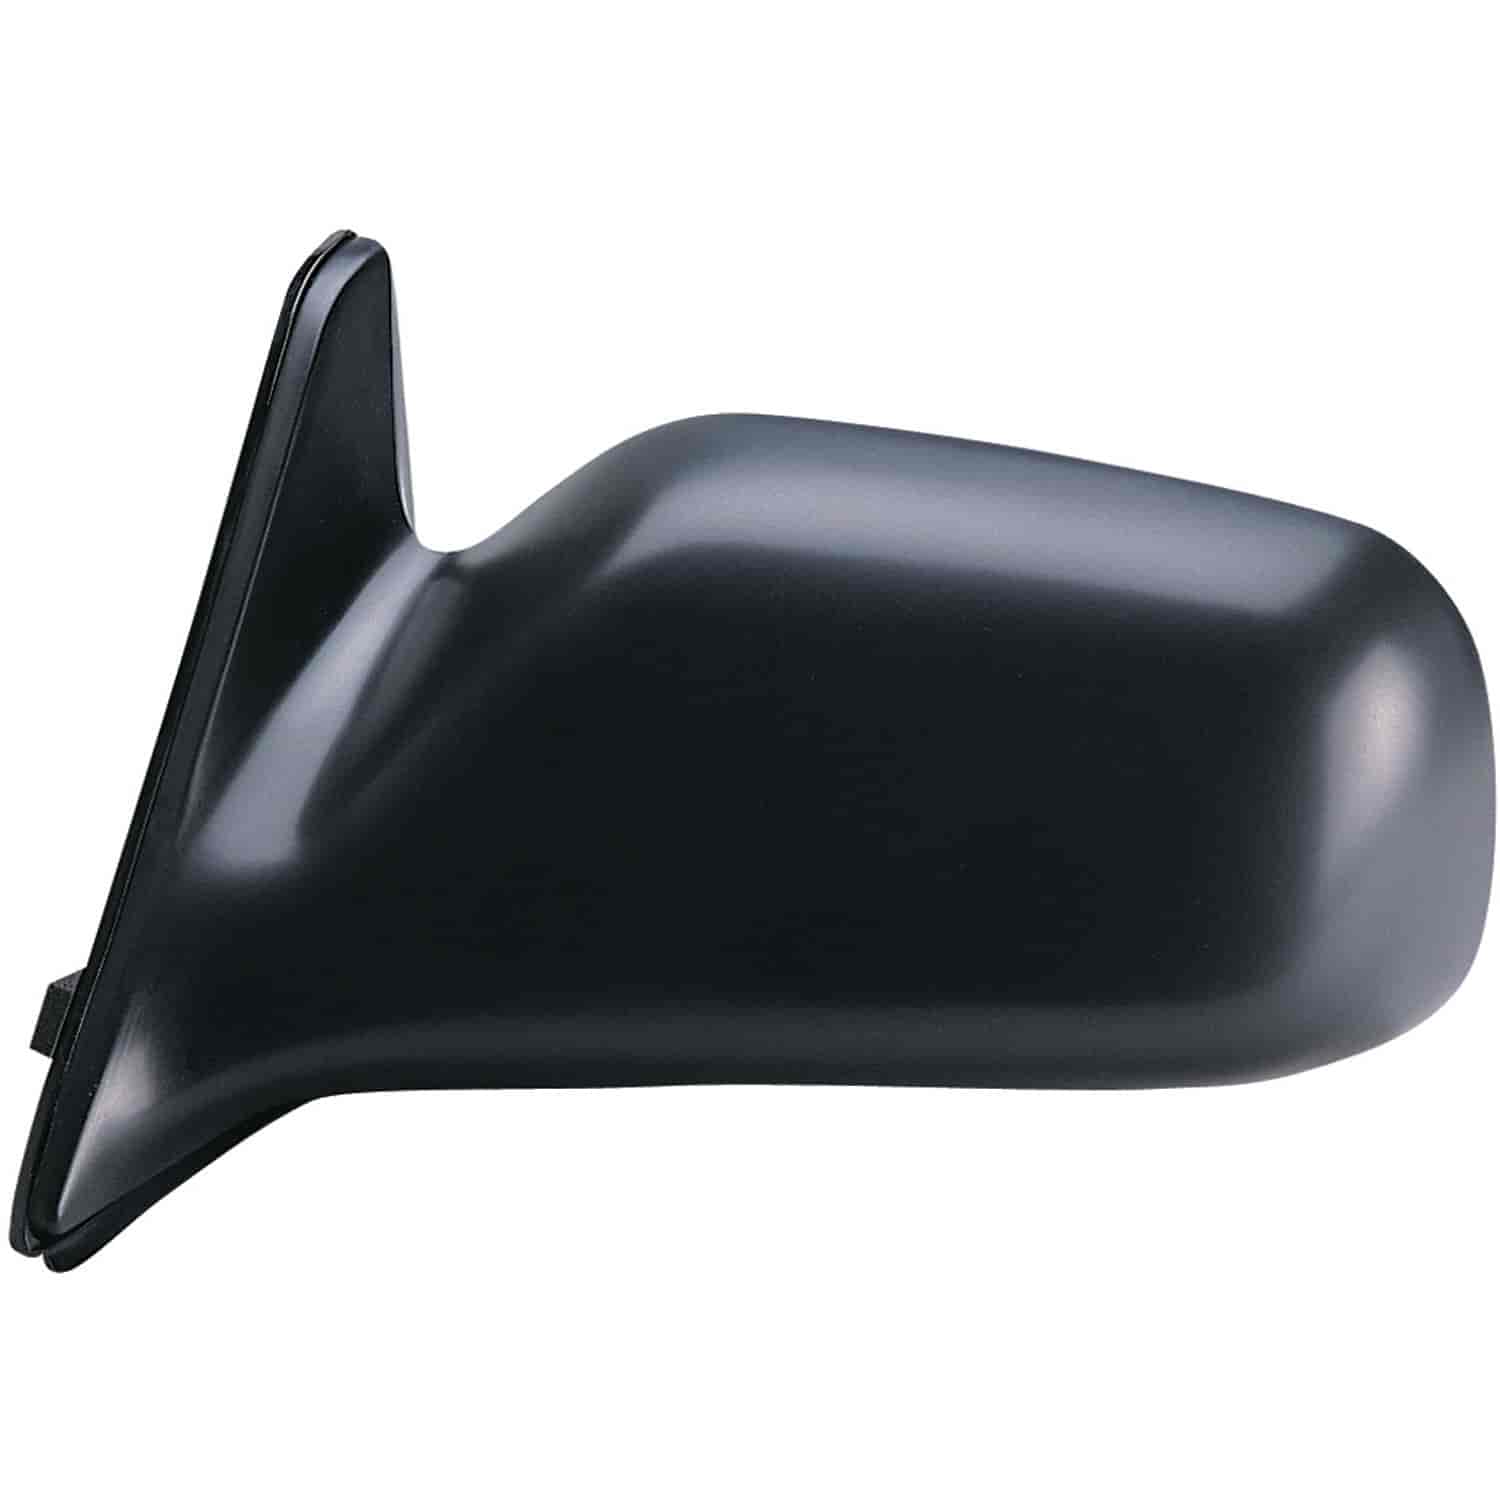 OEM Style Replacement mirror for 88-93 Toyota Corolla Sedan/ Wagon driver side mirror tested to fit